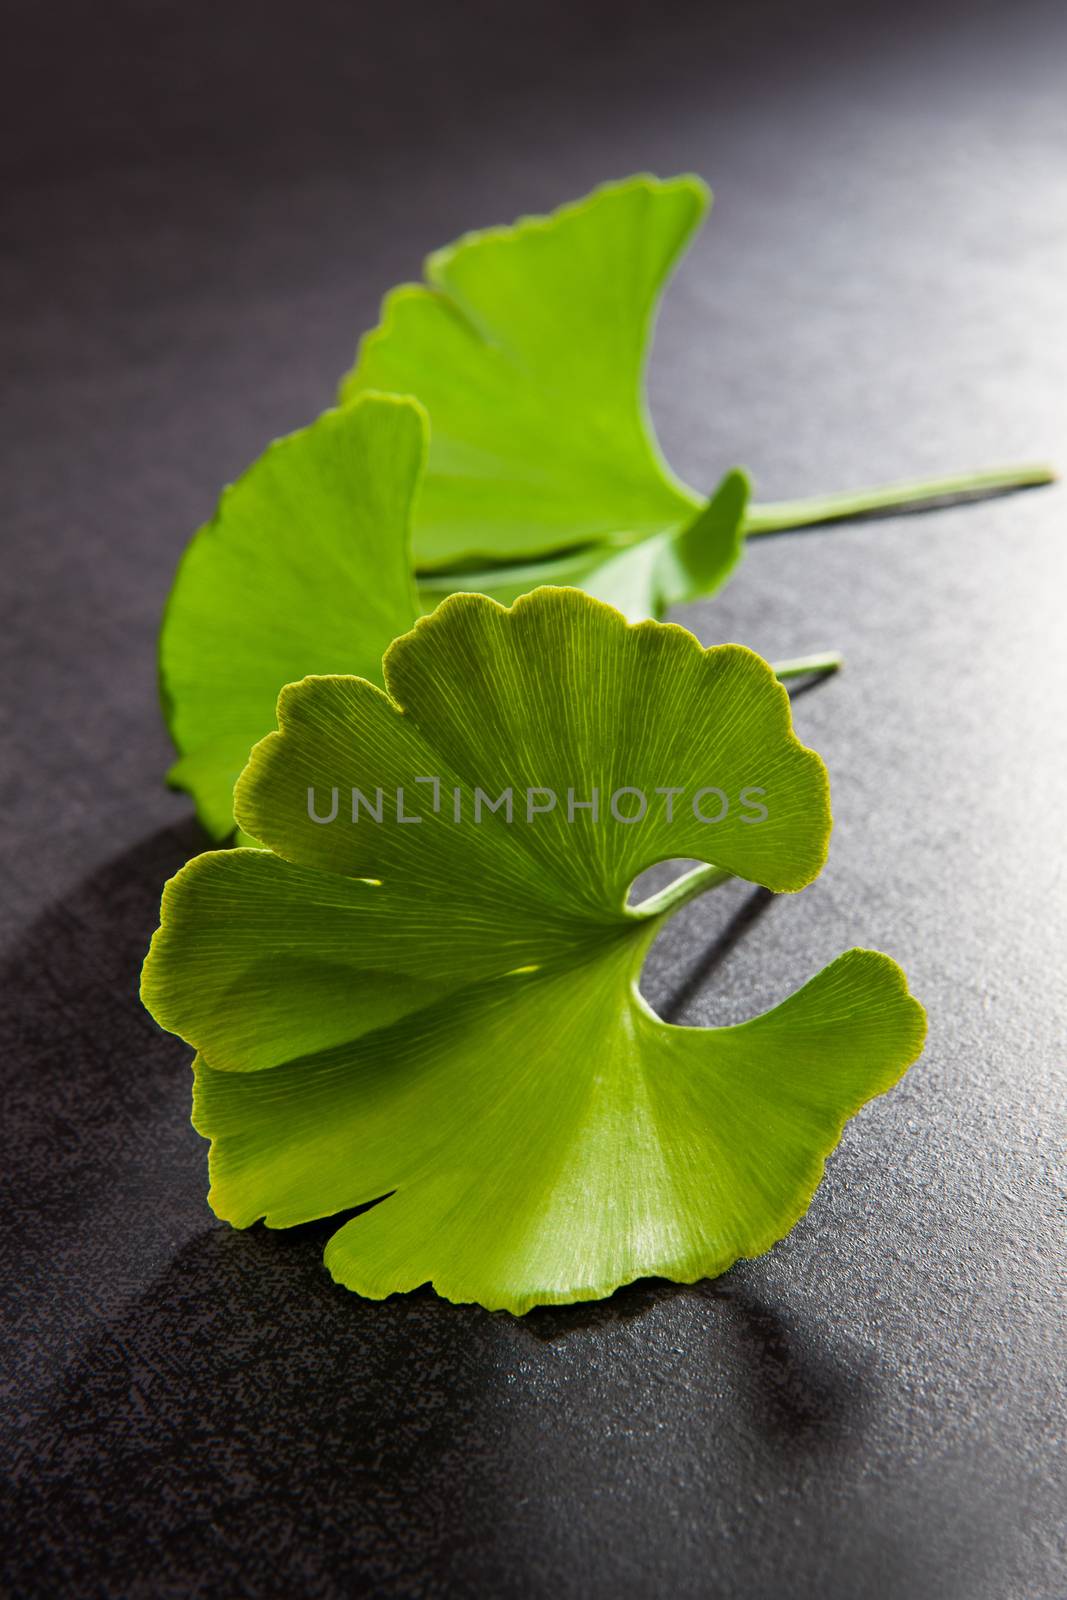 Ginkgo Biloba leaves isolated on black background. Good memory and healthy lifestyle concept.